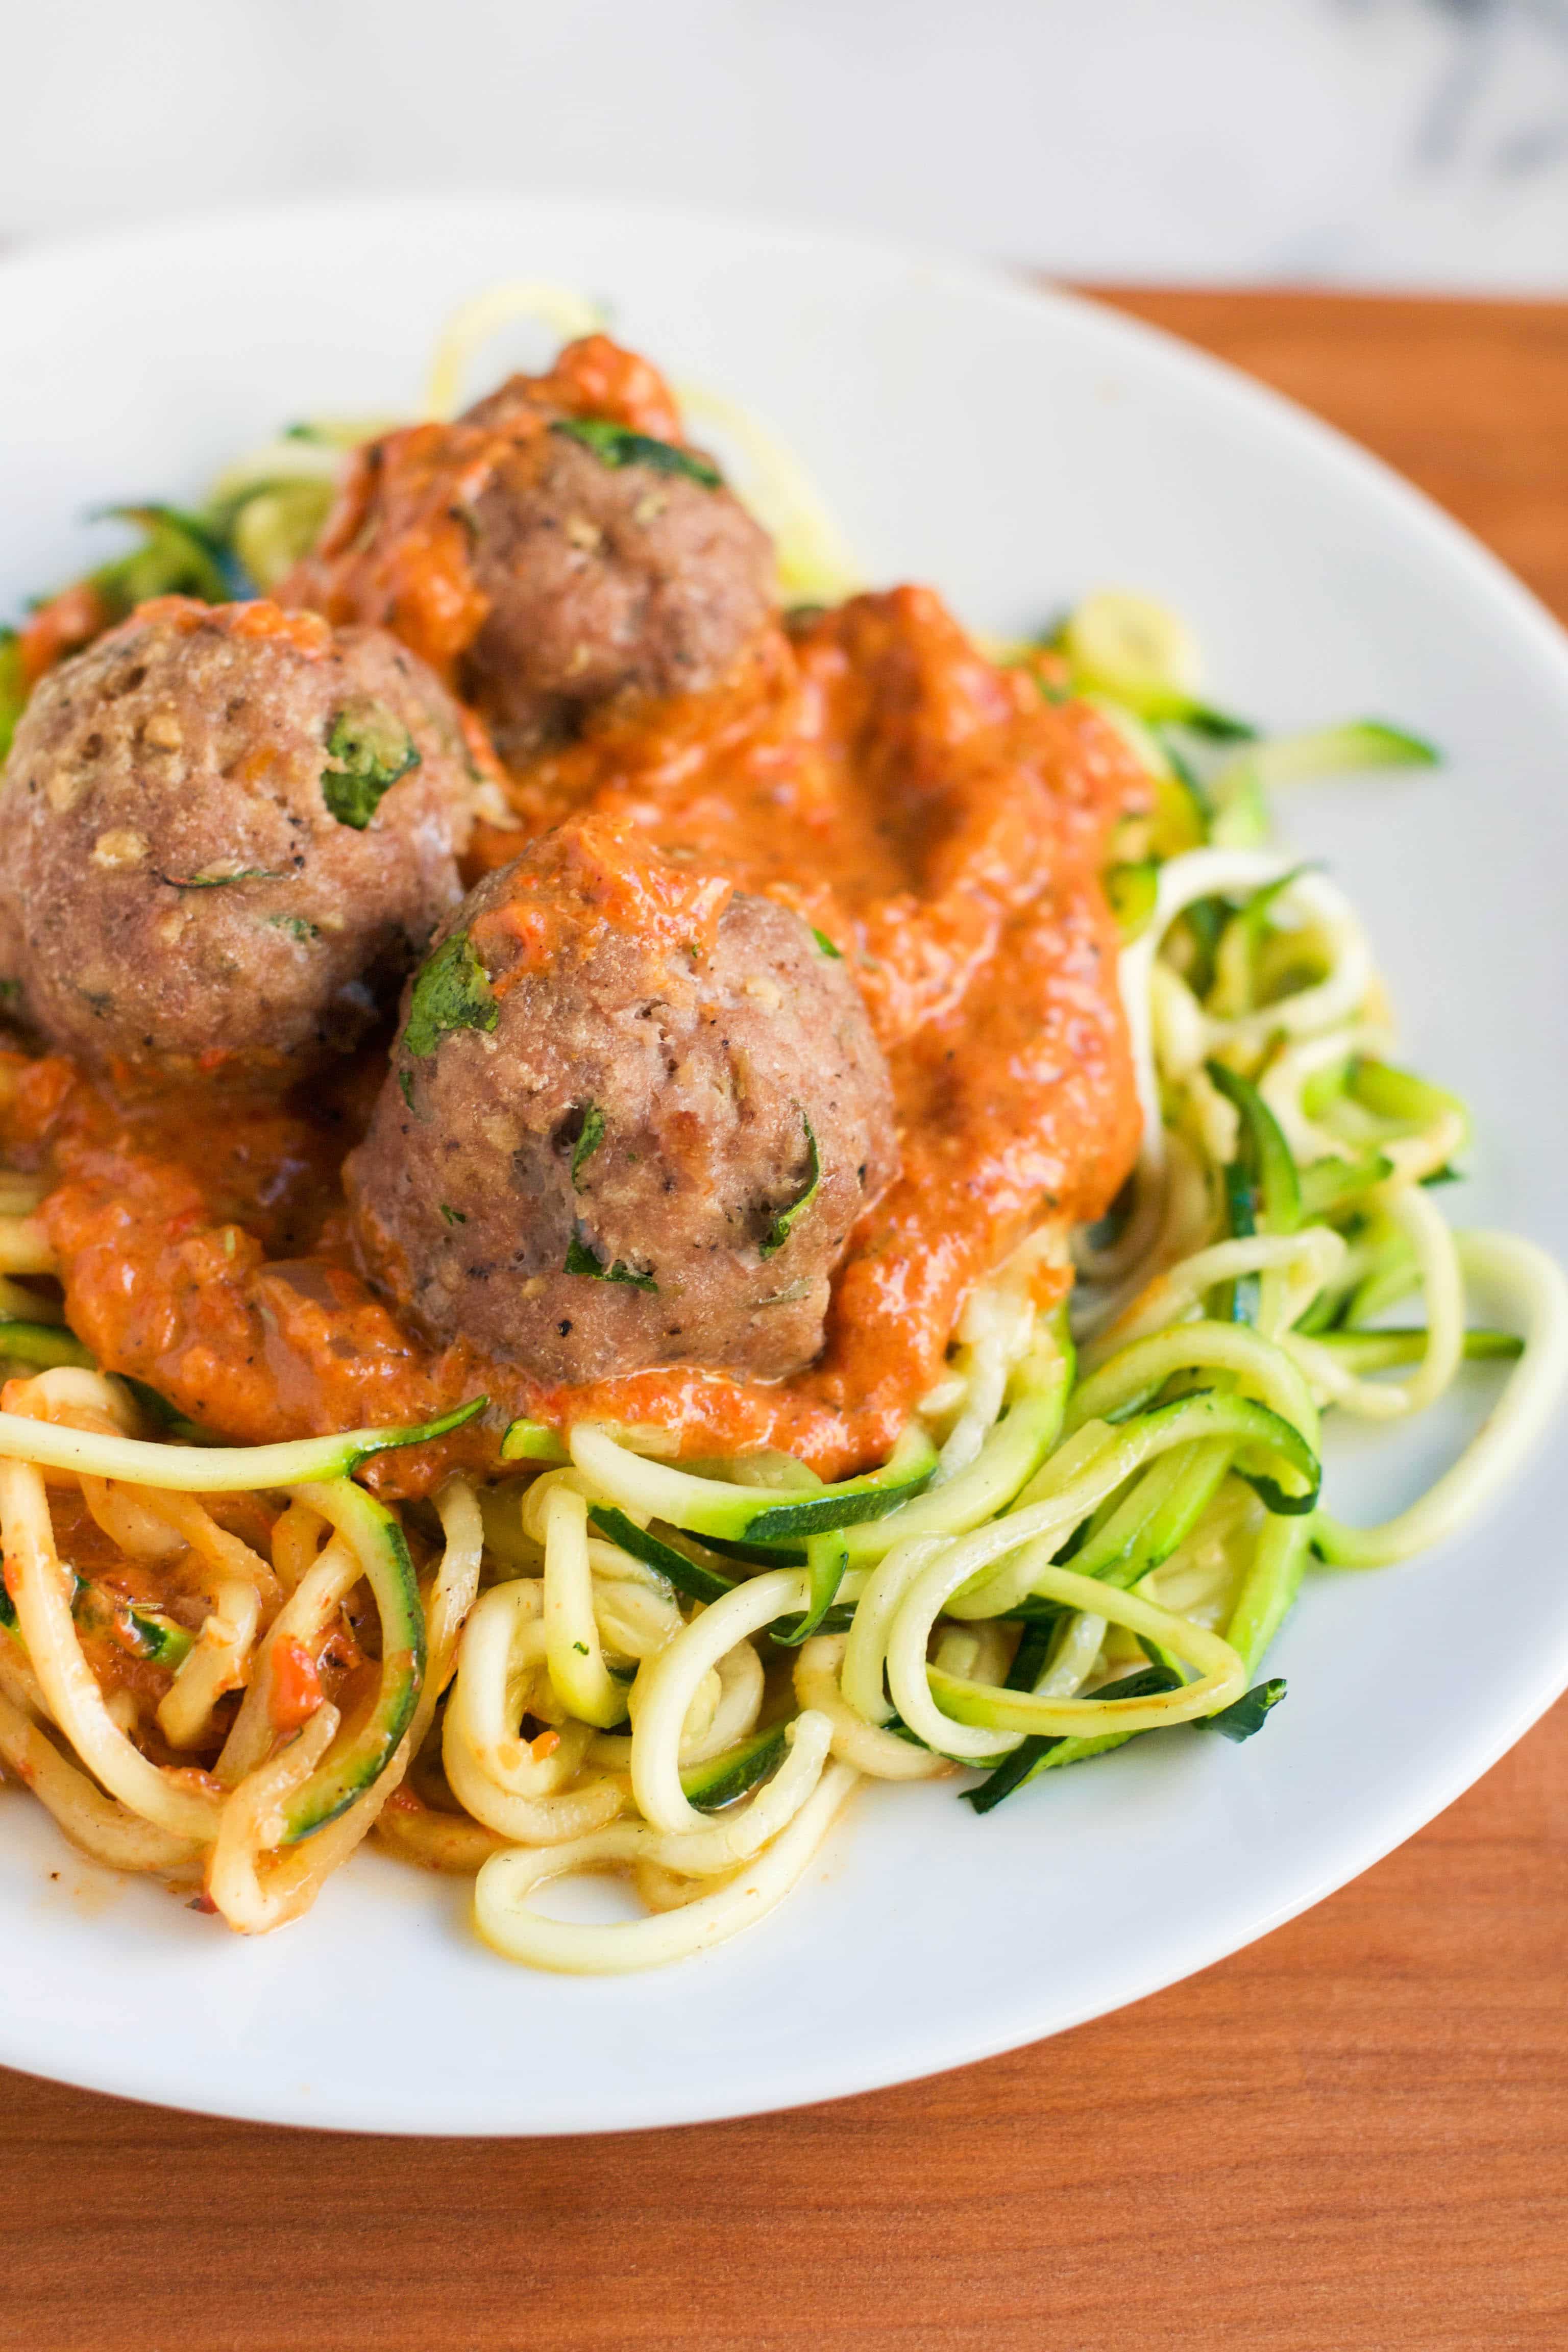 Zoodles with Turkey Meatballs in a Roasted Red Pepper Sauce